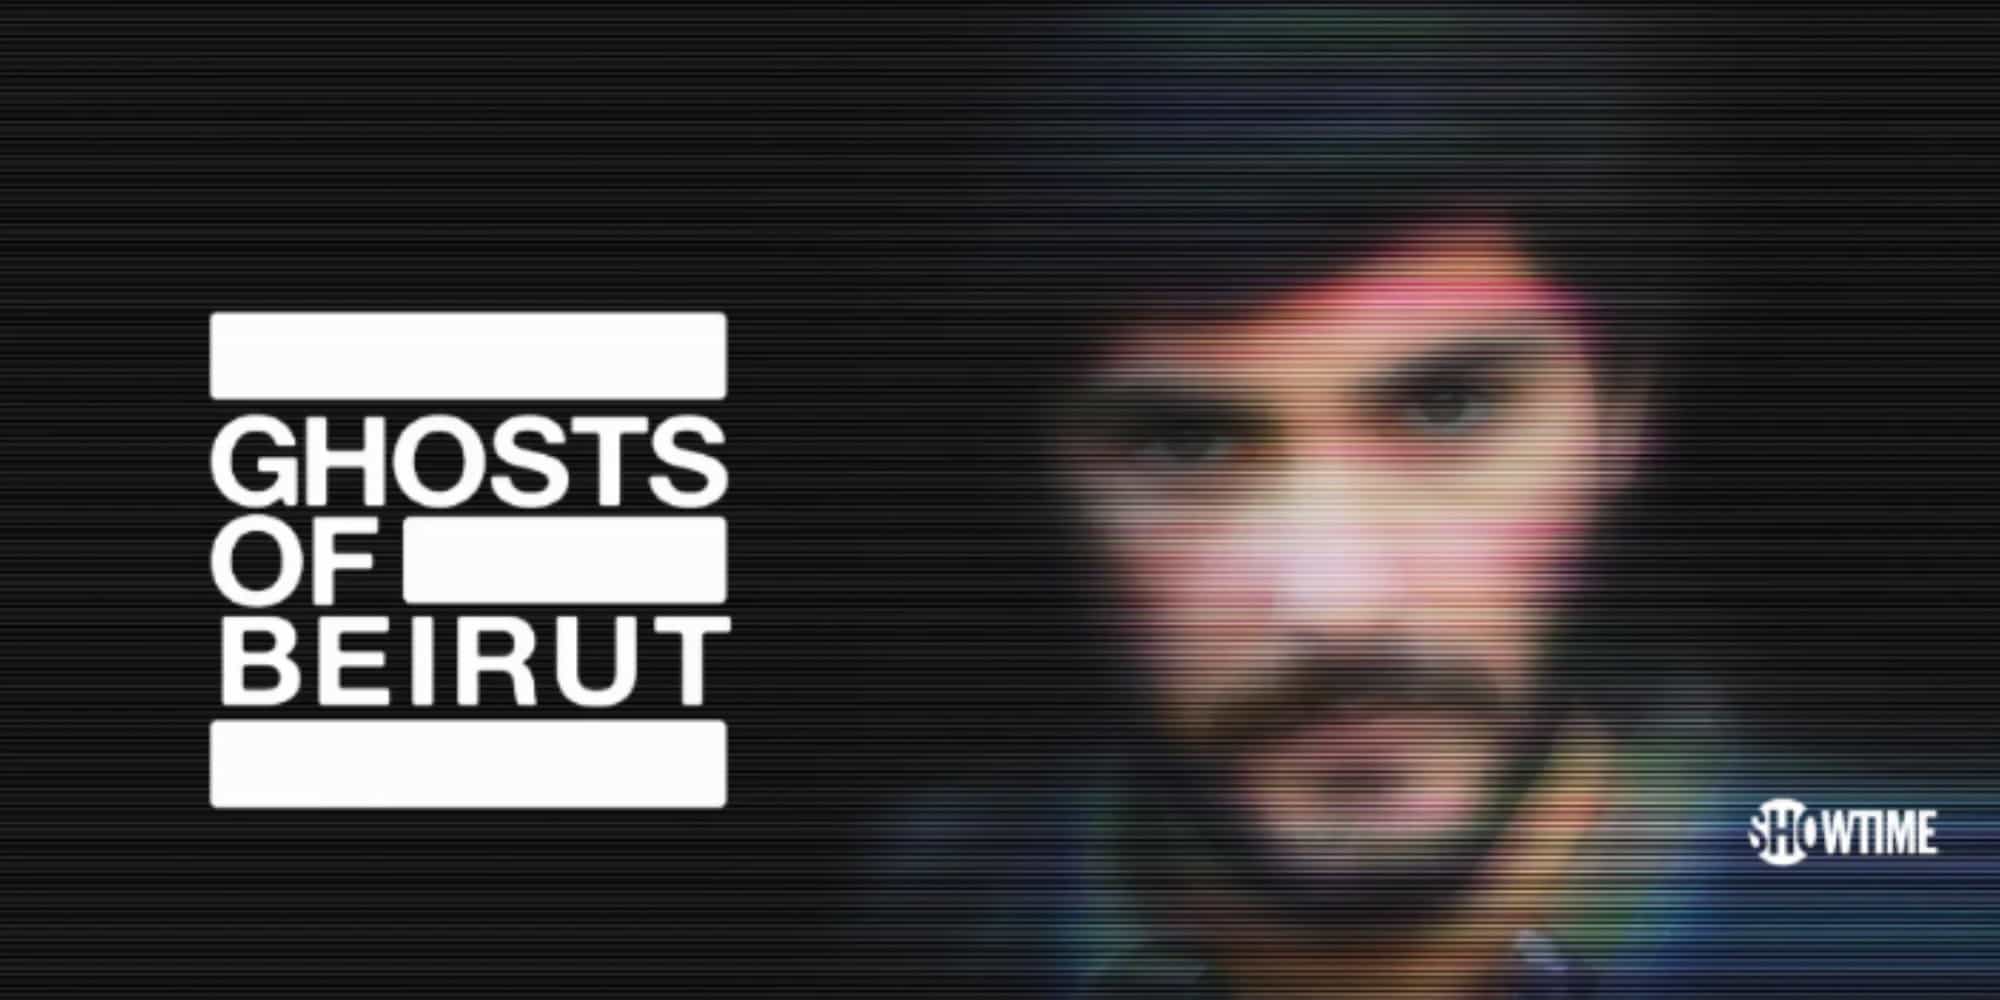 How To Watch Ghosts Of Beirut Episodes?